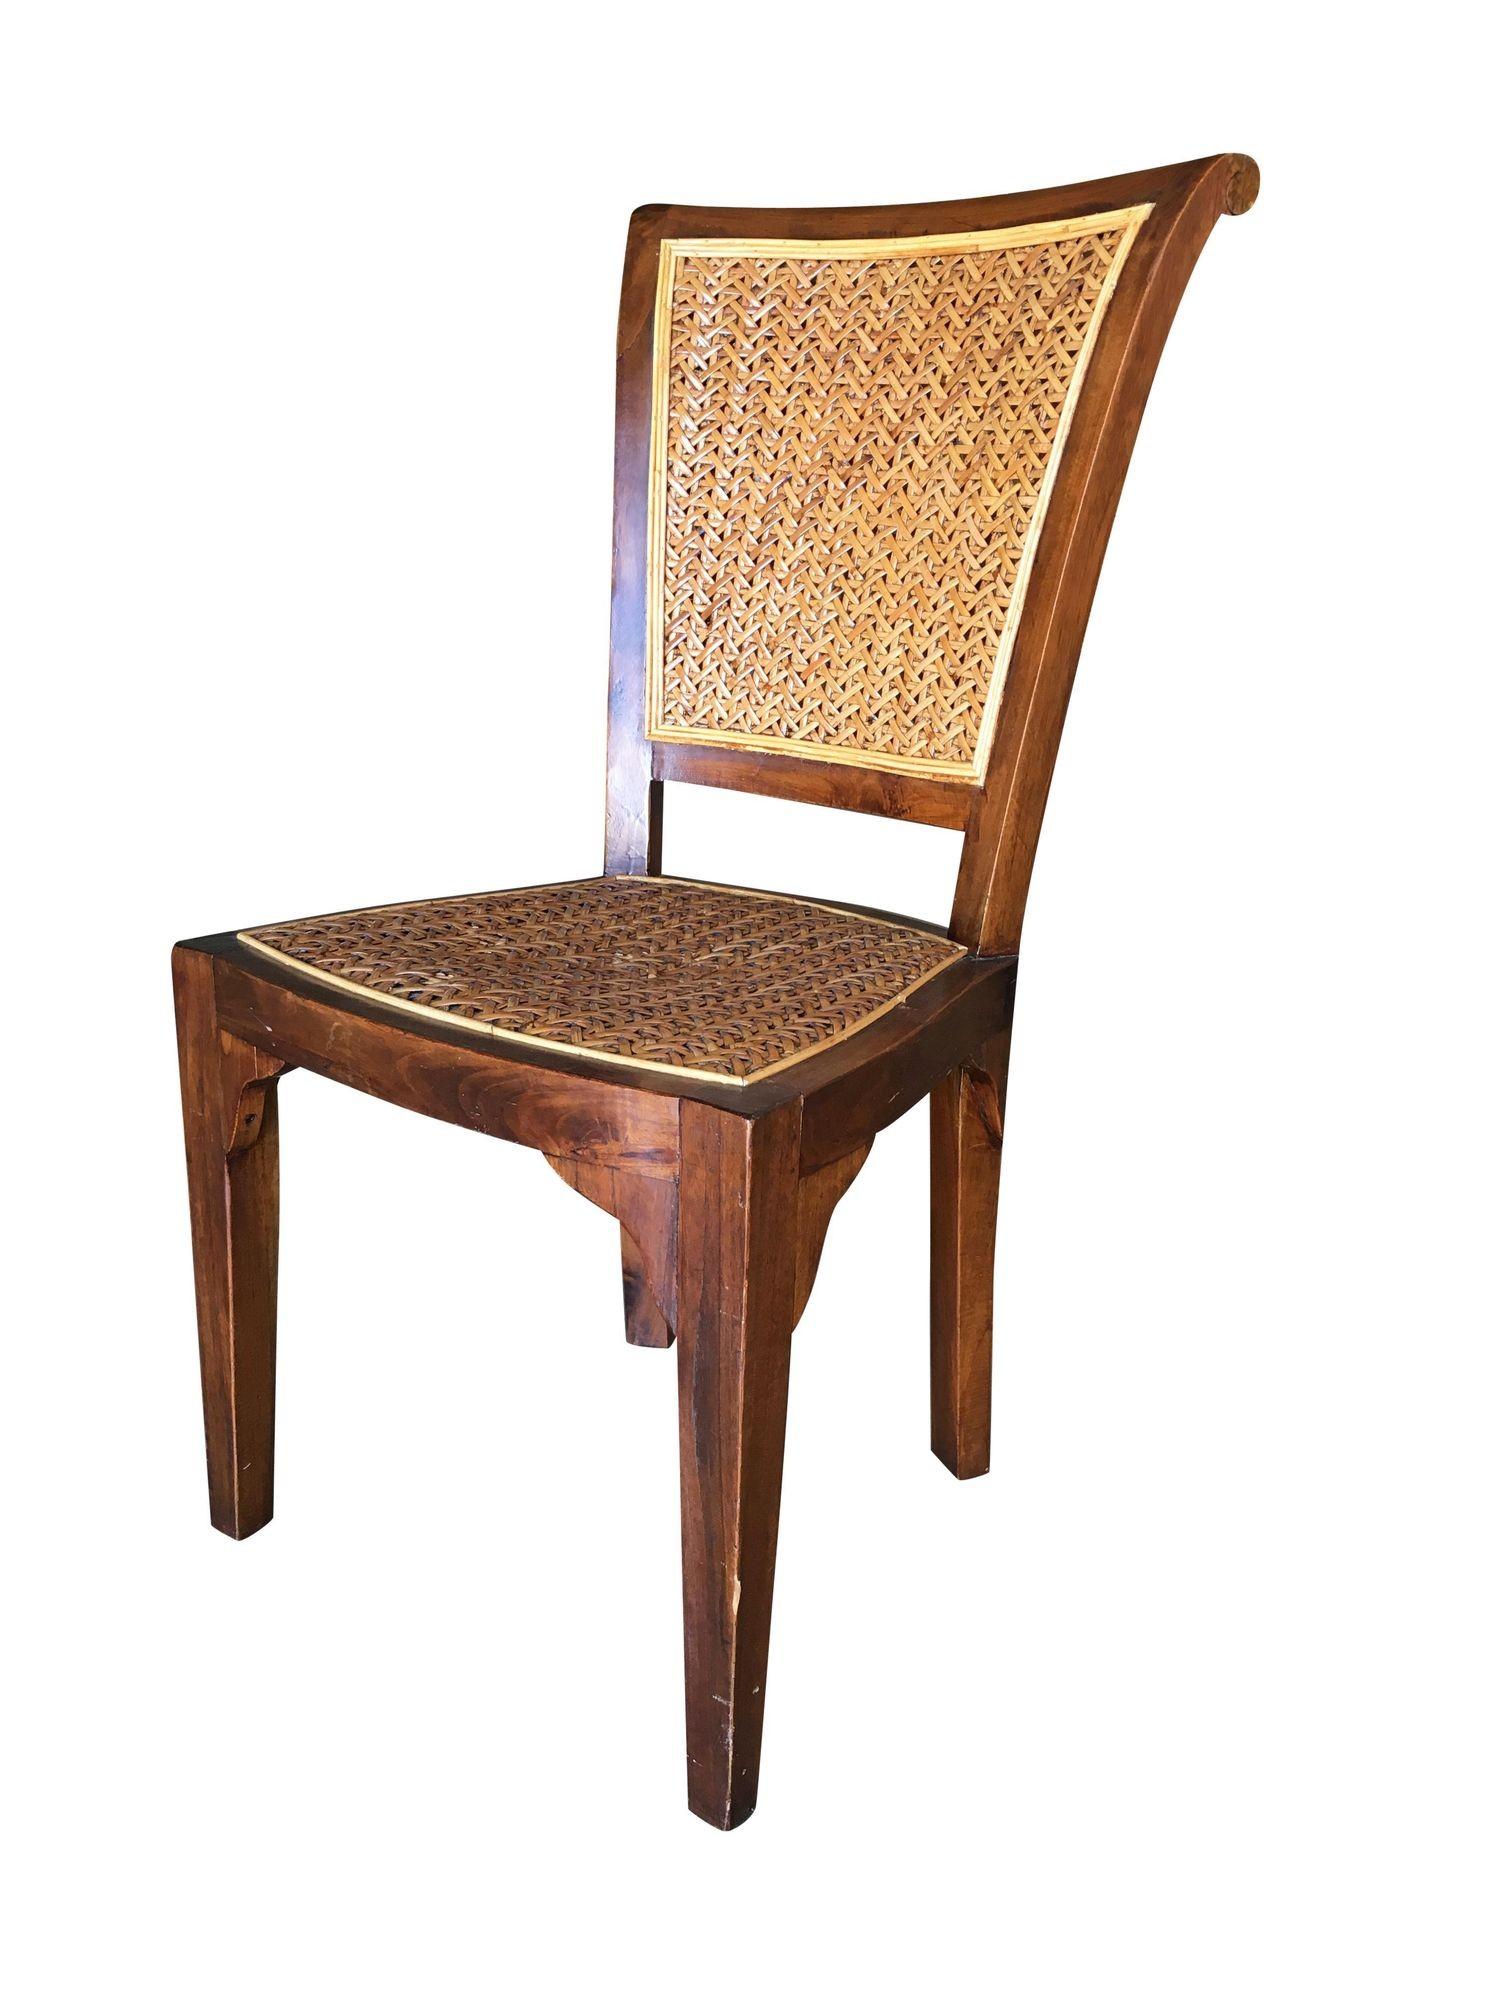 High Style Midcentury Mahogany Dining Chair with Woven Wicker Seat For Sale 2